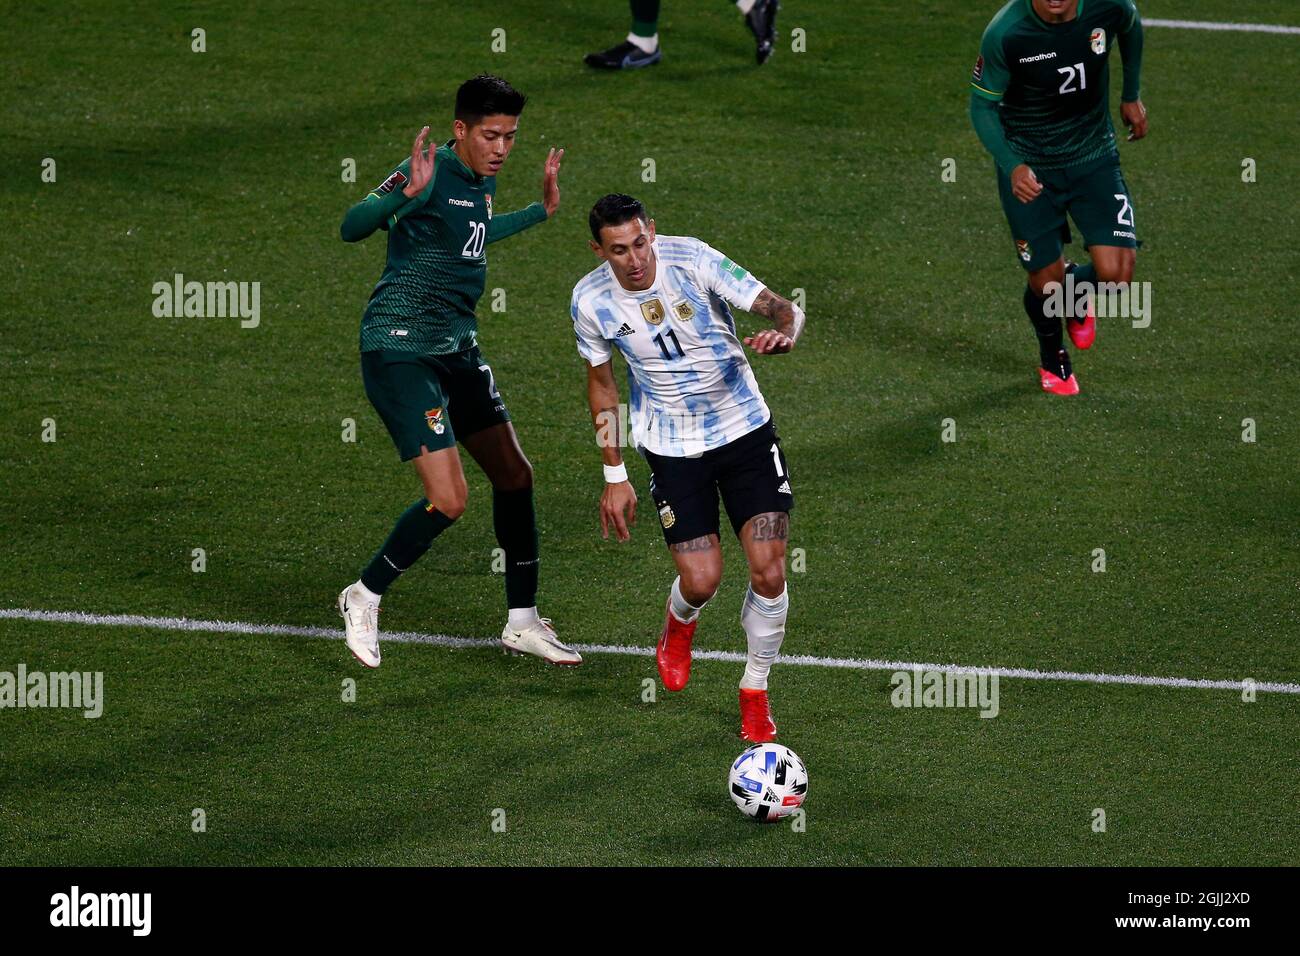 Buenos Aires, Argentina. 09th Sep, 2021. BUENOS AIRES - SEPTEMBER 9: Forward Angel Di María (11) of Argentina fights for the ball with defender Ramiro Vaca (20) of Bolivia during a match between Argentina and Bolivia as part of South American Qualifiers for Qatar 2022 at Estadio Monumental Antonio Vespucio Liberti on September 9, 2021 in Buenos Aires, Argentina. (Photo by Florencia Tan Jun/PxImages) Credit: Px Images/Alamy Live News Stock Photo